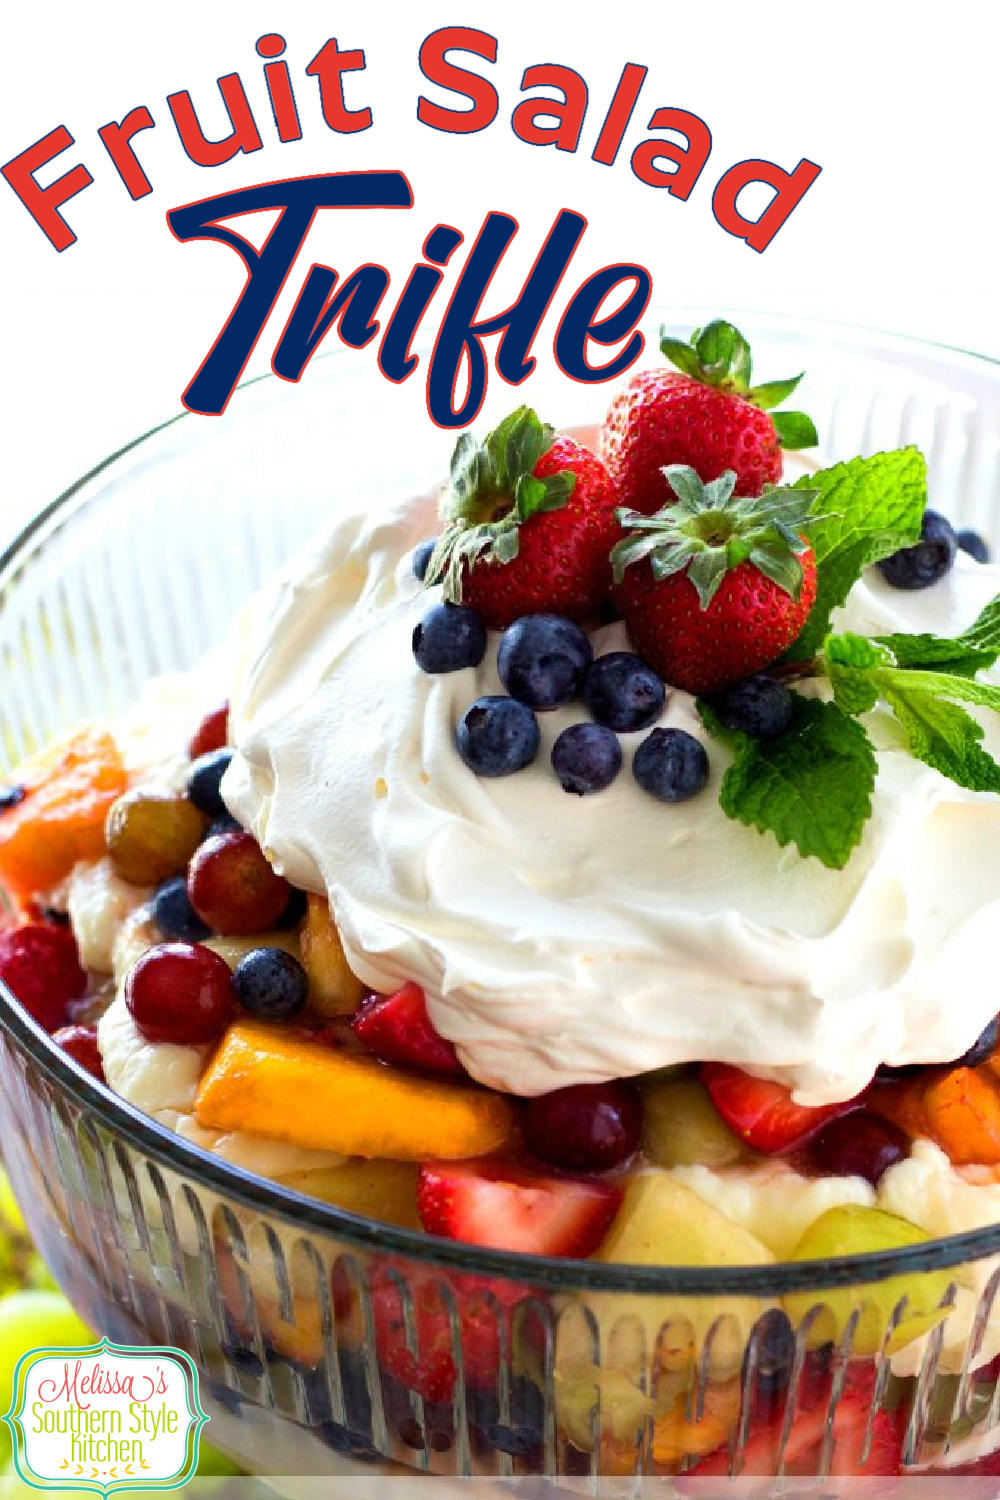 This luscious Fruit Salad Trifle is layered with a luscious cheesecake-like filling #fruitsalad #fruit #mixedfruit #punchbowl #fruitsaladtrifle #fruitsaladrecipes #berrysalad #sweets #desserts #trifles #dessertdoodrecipes #triflerecipes #southernfood #southernrecipes via @melissasssk